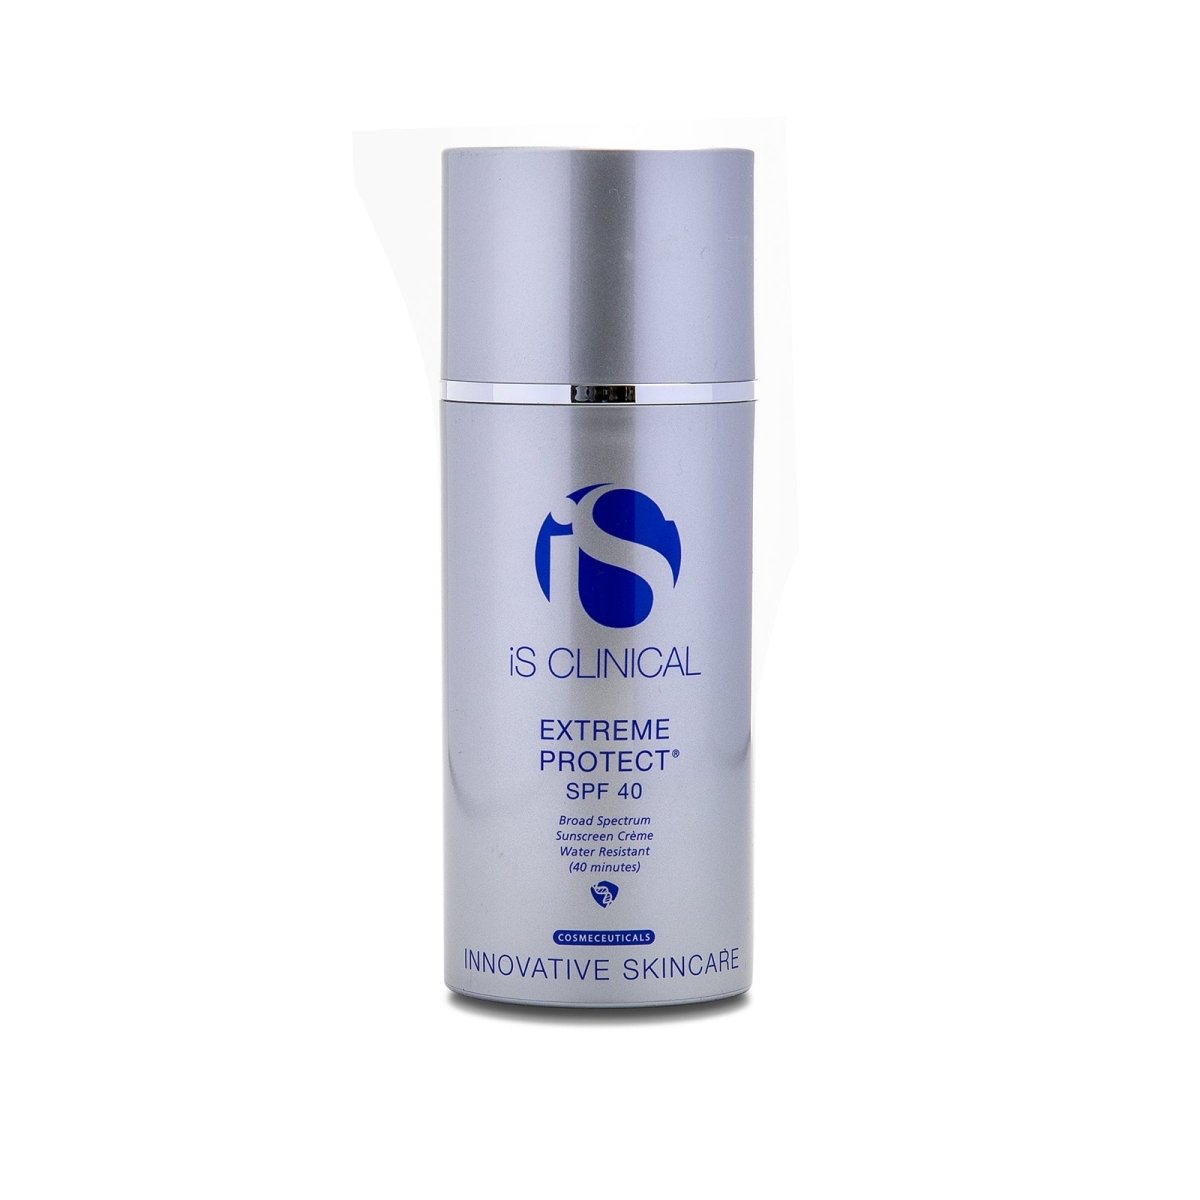 iS Clinical Extreme Protect SPF 40 - SkincareEssentials